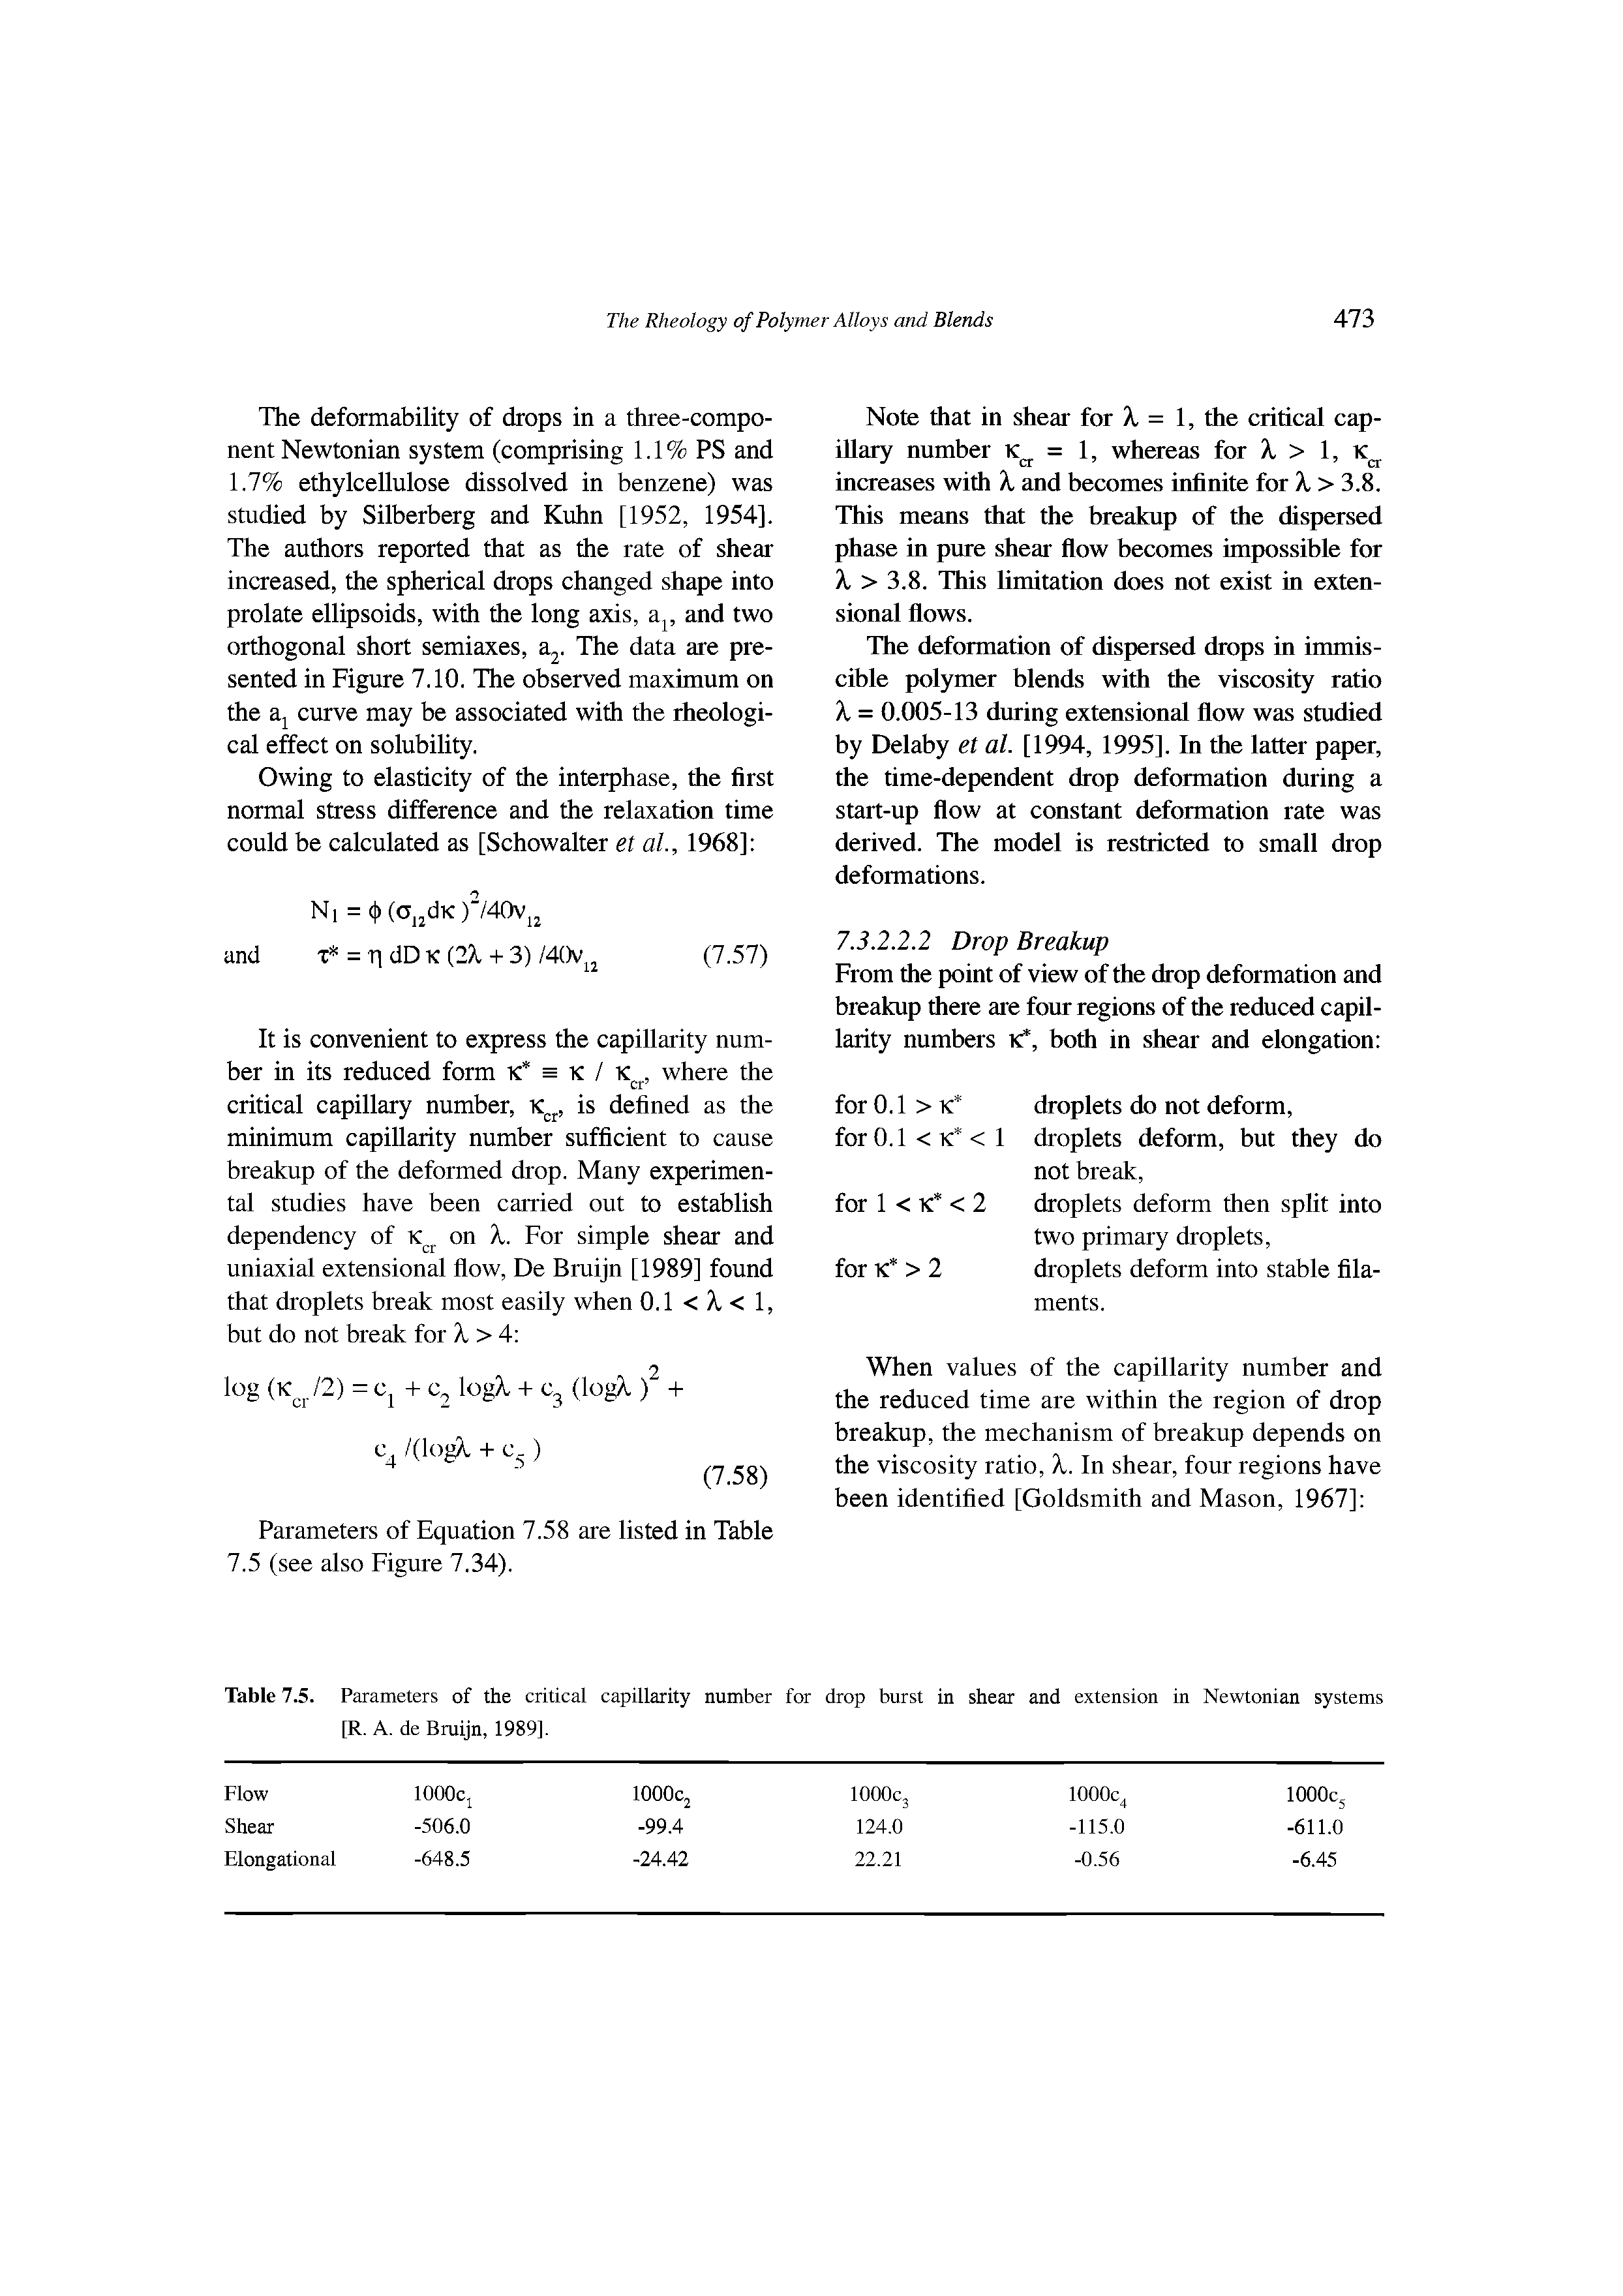 Table 7.5. Parameters of the critical capillarity number for drop burst in shear and extension in Newtonian systems [R. A. de Bruijn, 1989].